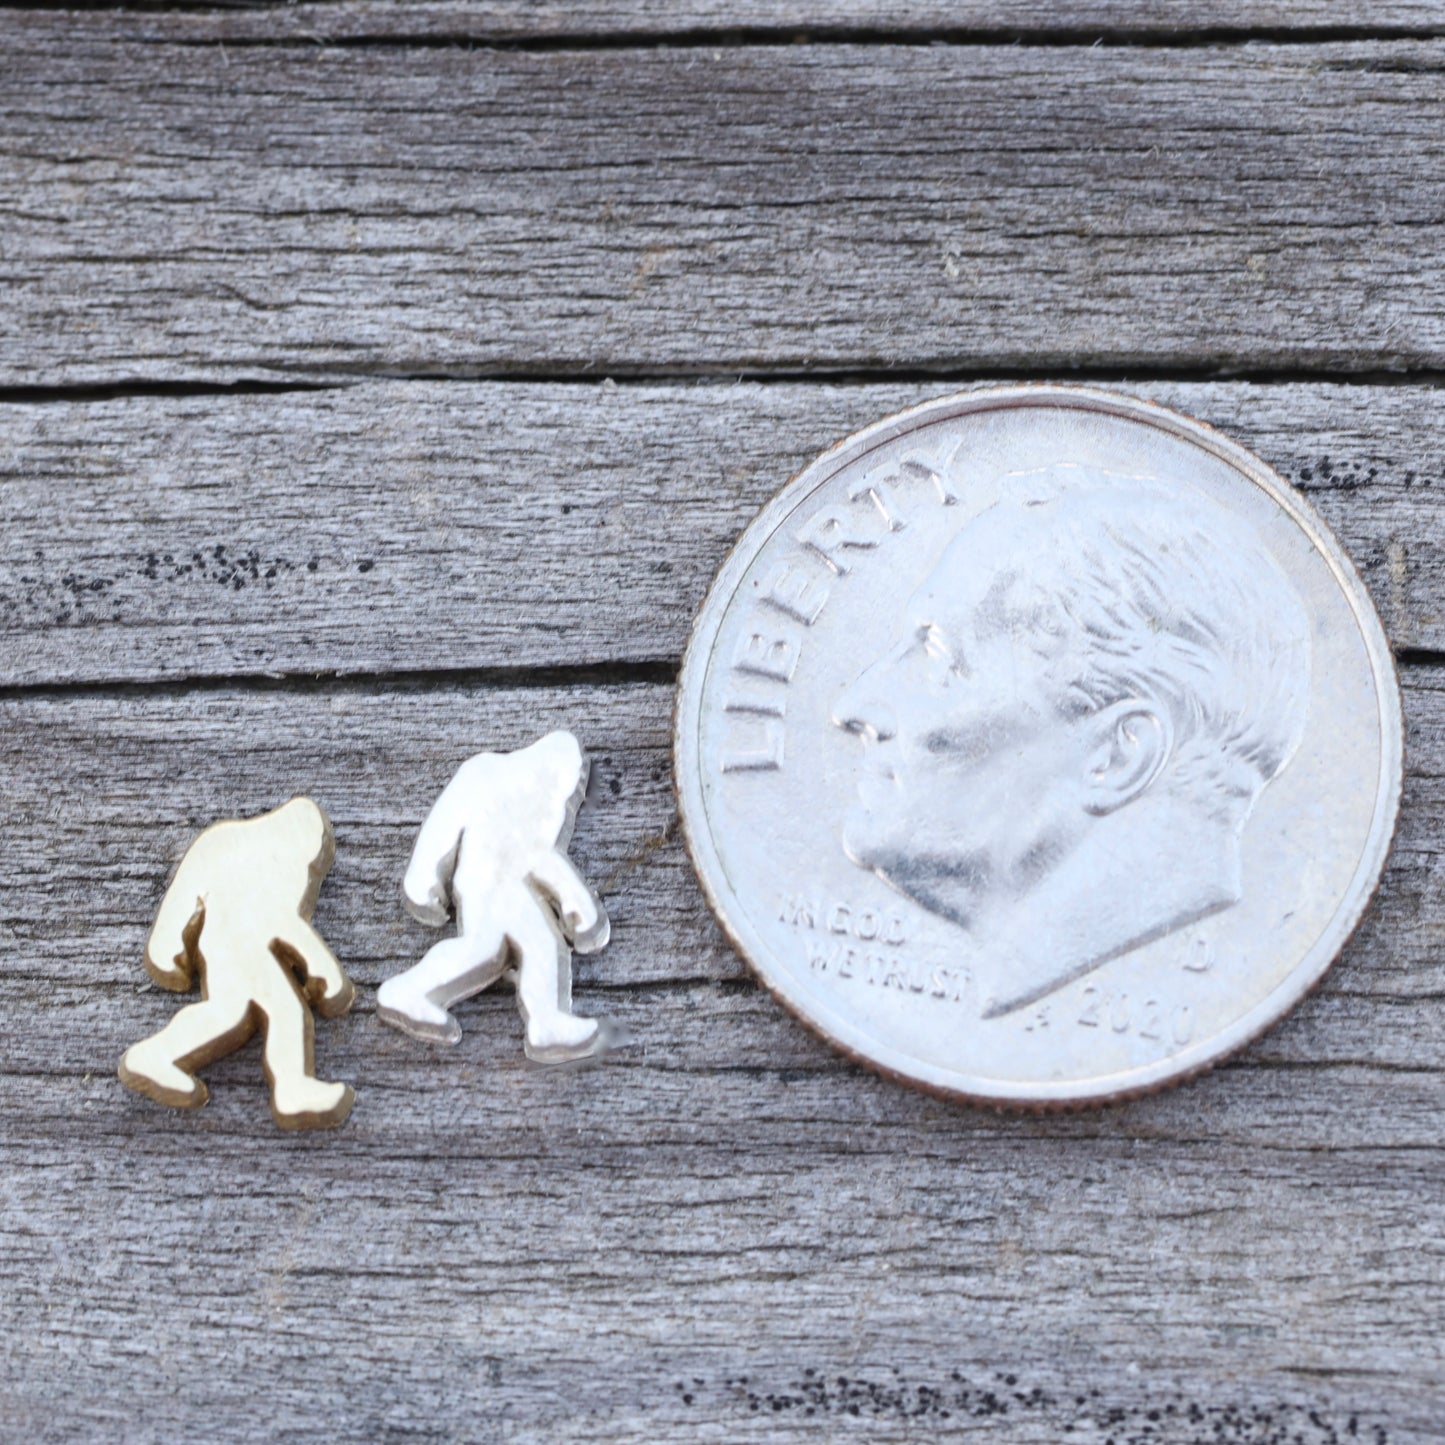 Bigfoot Sasquatch Accent Charm Embellishments for Soldering or Jewelry Making